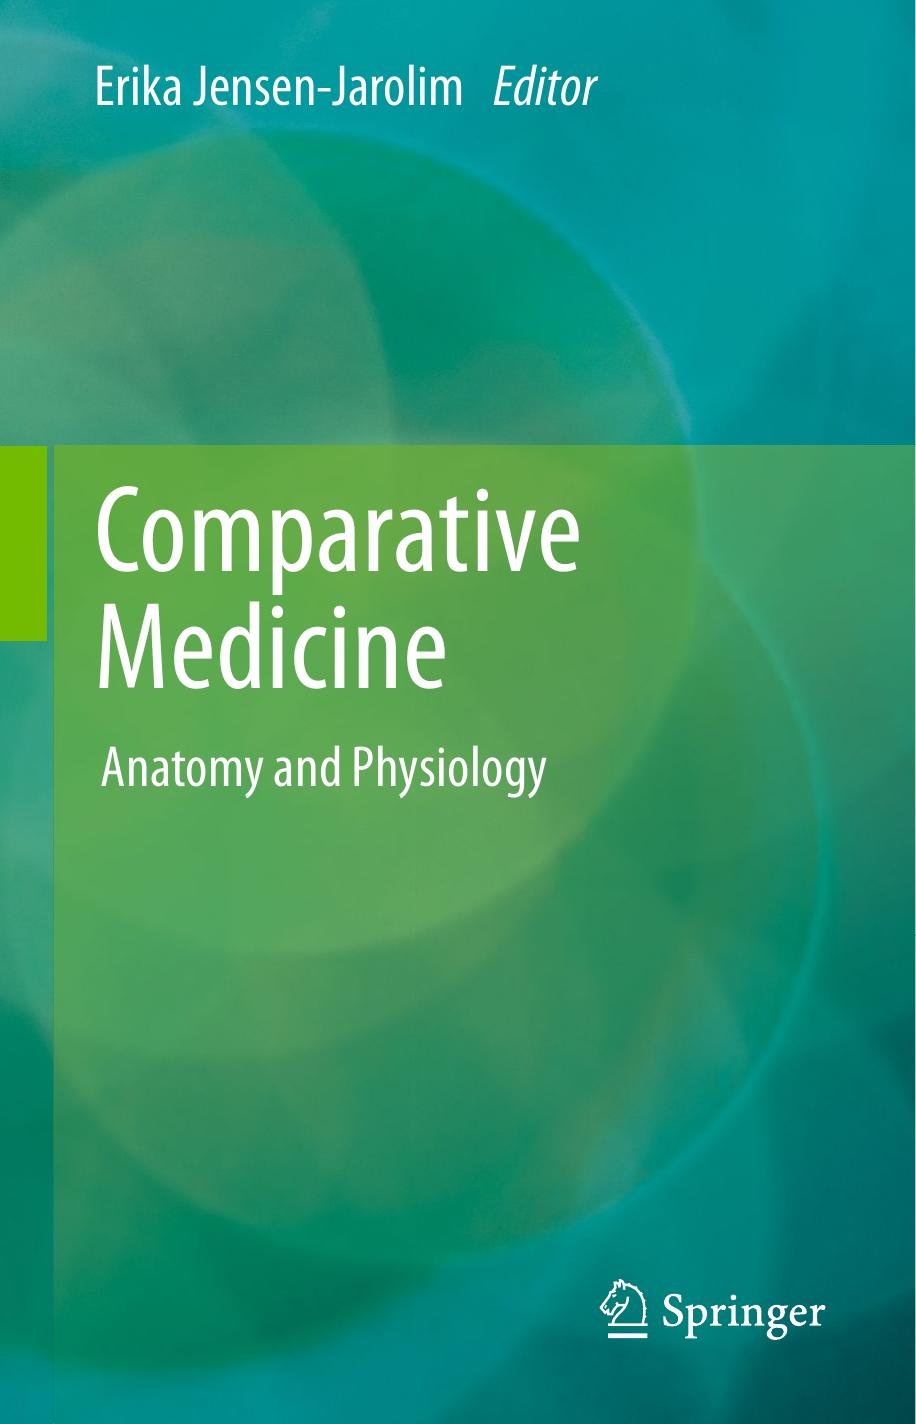 Comparative Medicine, Anatomy and Physiology